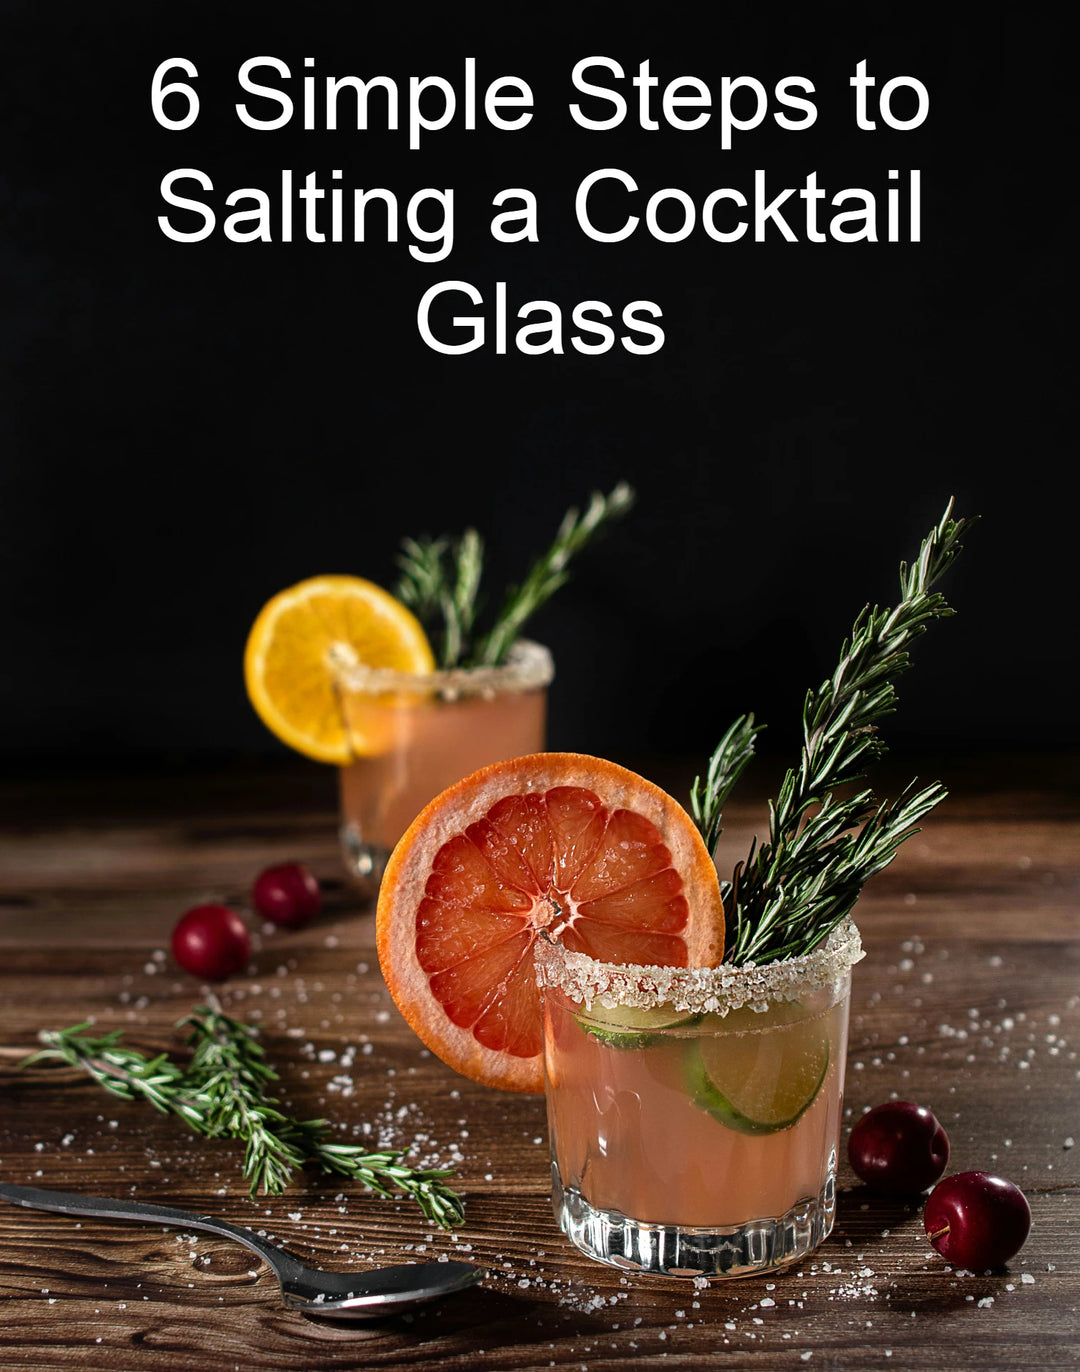 Master the Art of Salting a Cocktail Glass in 6 Simple Steps